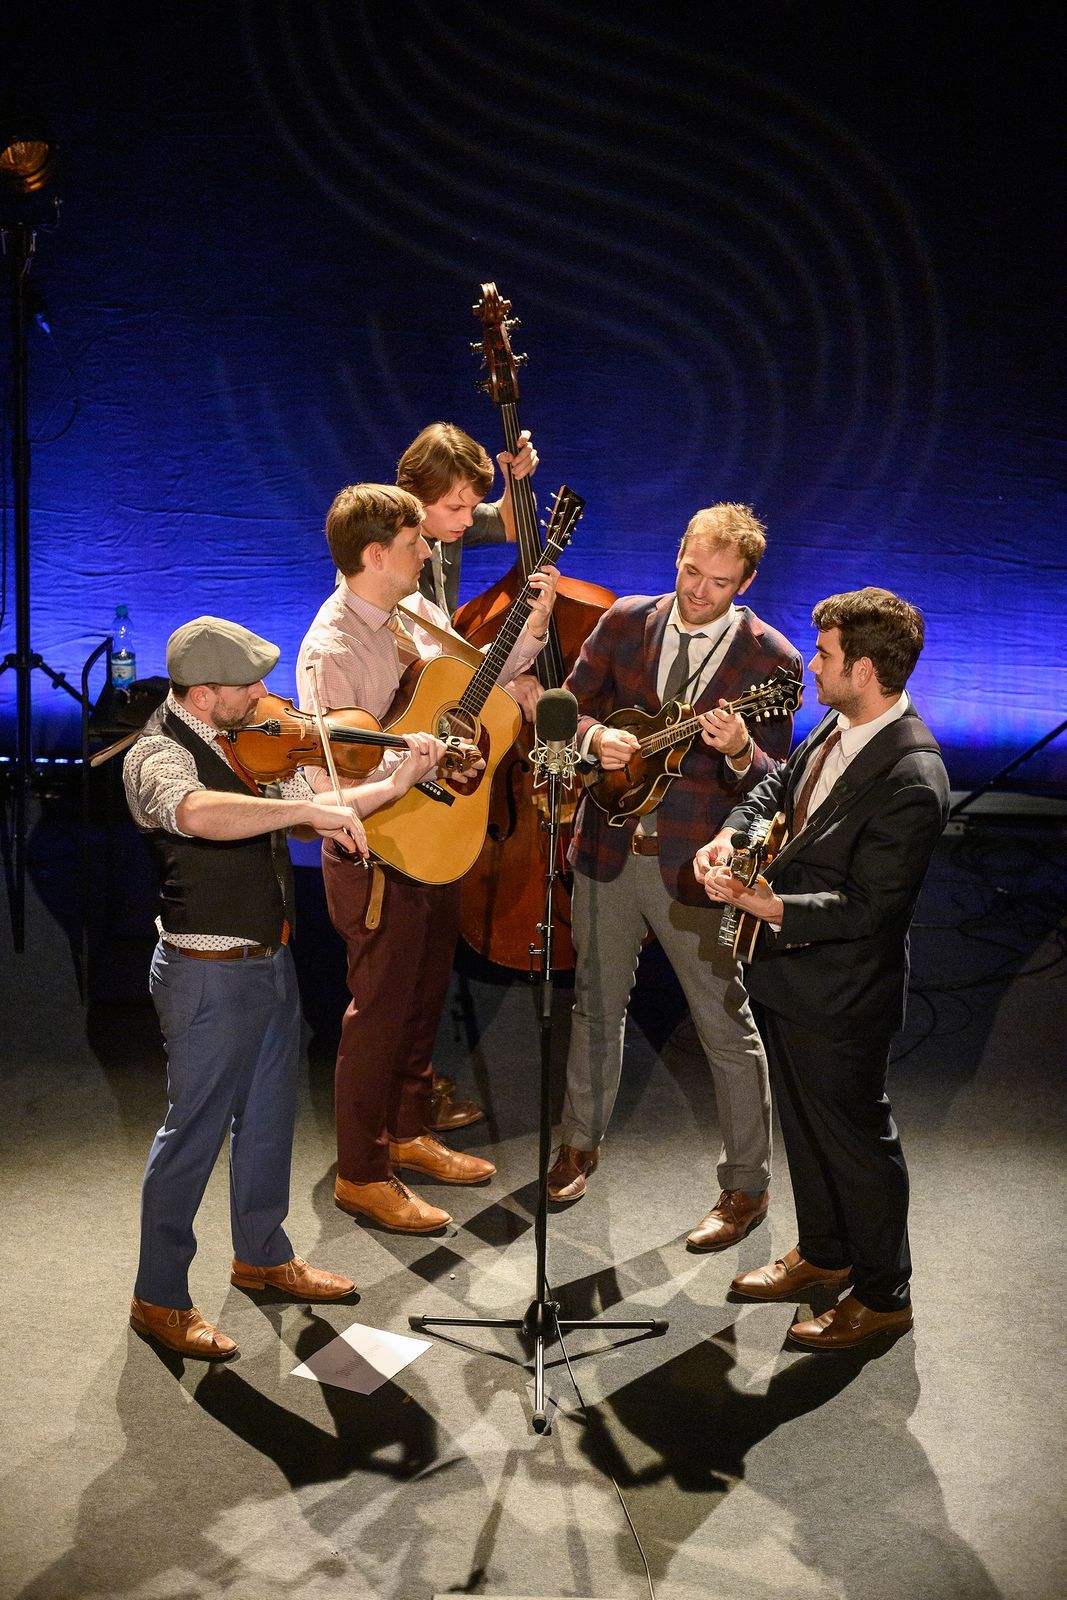 Punch Brothers